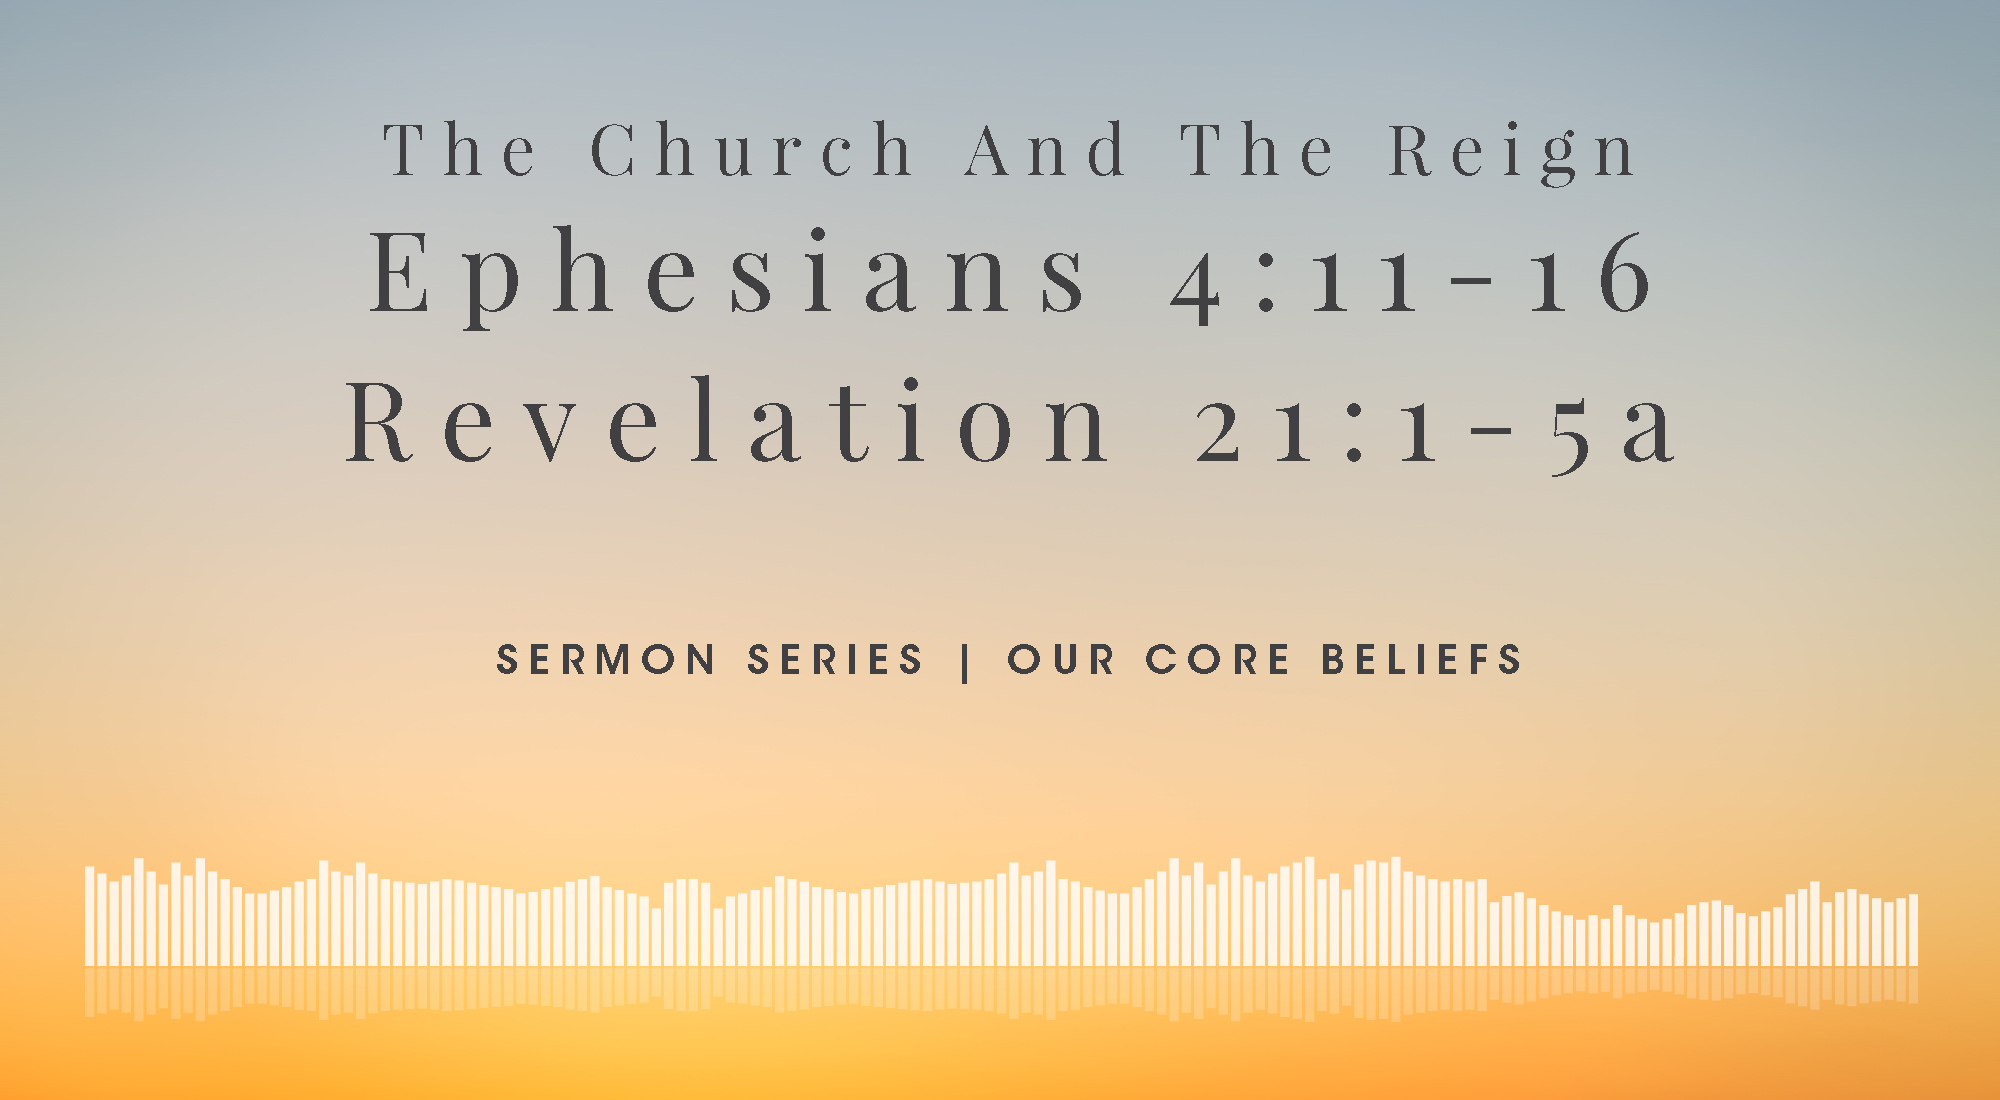 Our Core Beliefs at Wyandotte County Christian Church In Kansas City, KS - The Church and the Reign - Ephesians 4:11-16 Revelation 21:1-5a